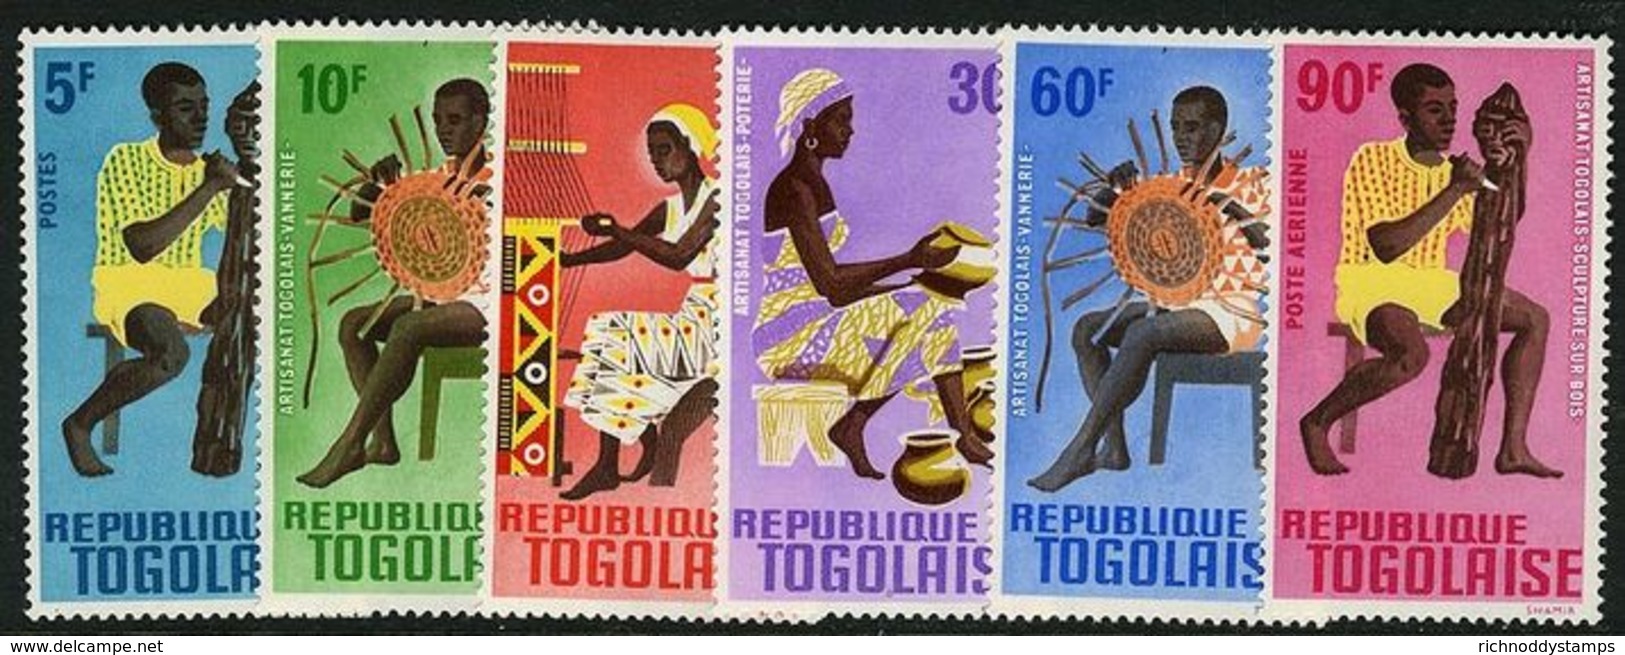 Togo 1966 Costumes And Dance Set Unmounted Mint. - Togo (1960-...)